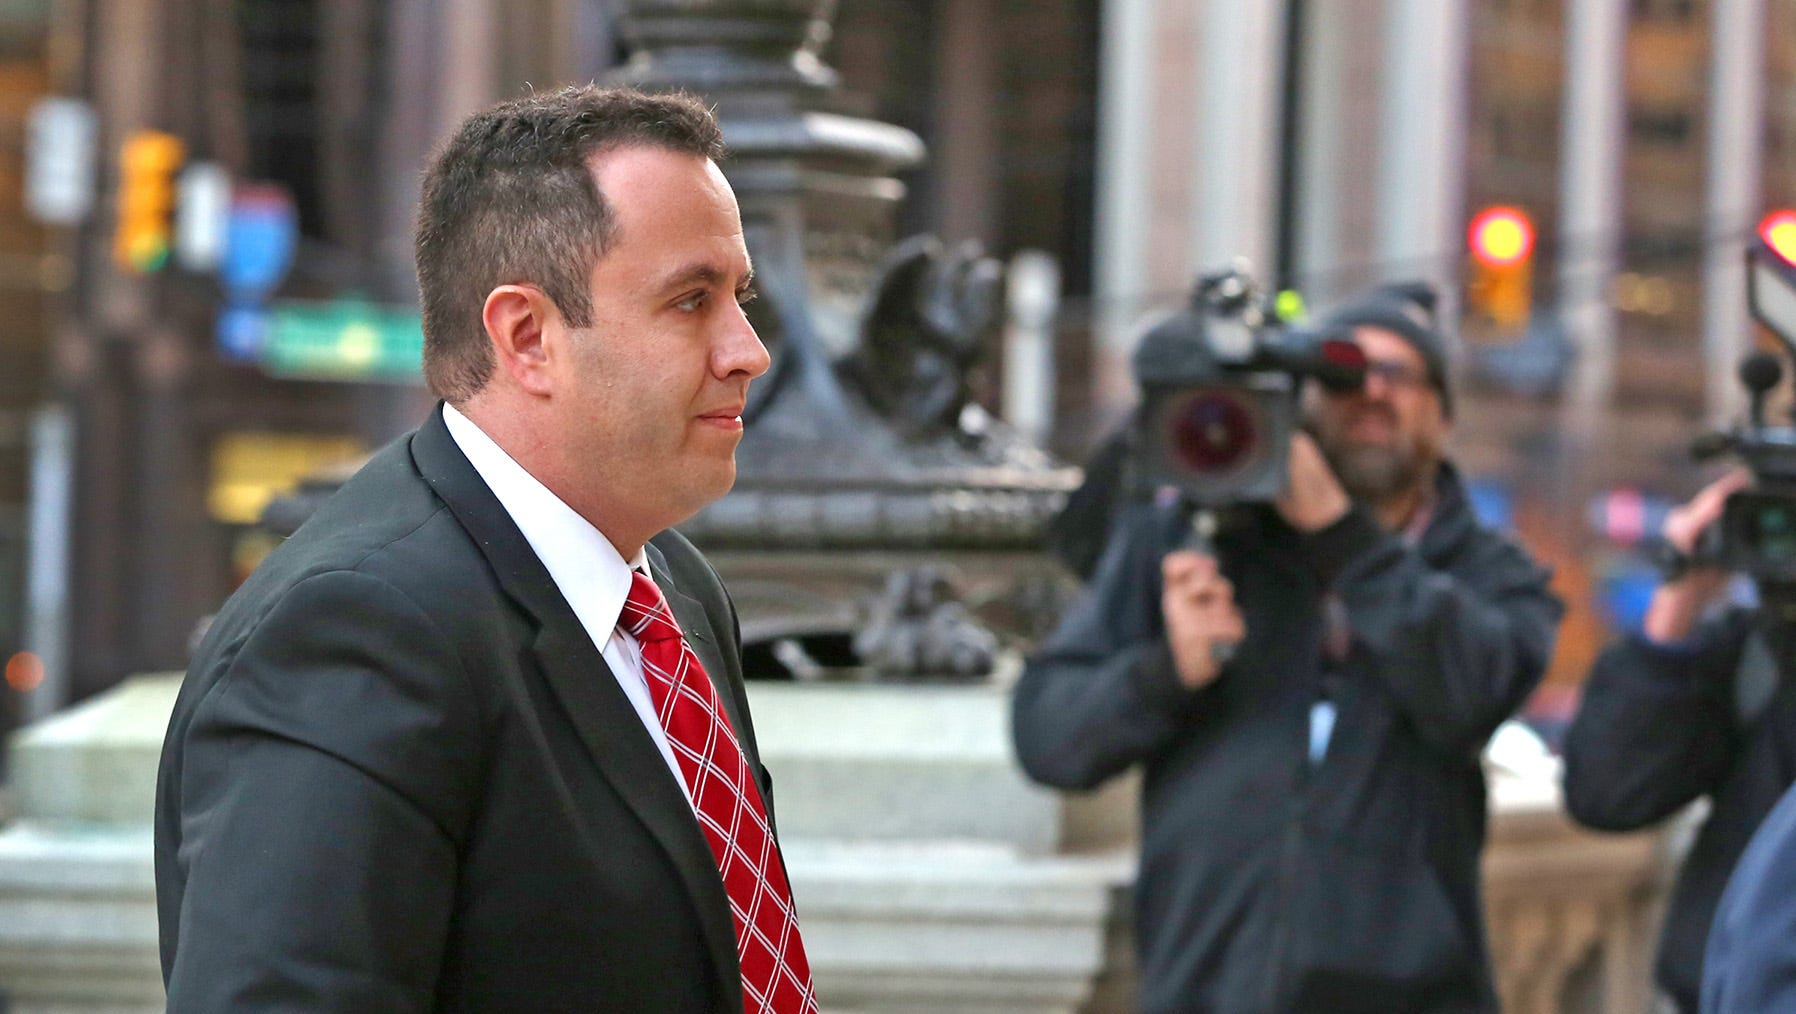 Jared Fogle sentenced to nearly 16 years on child porn charges